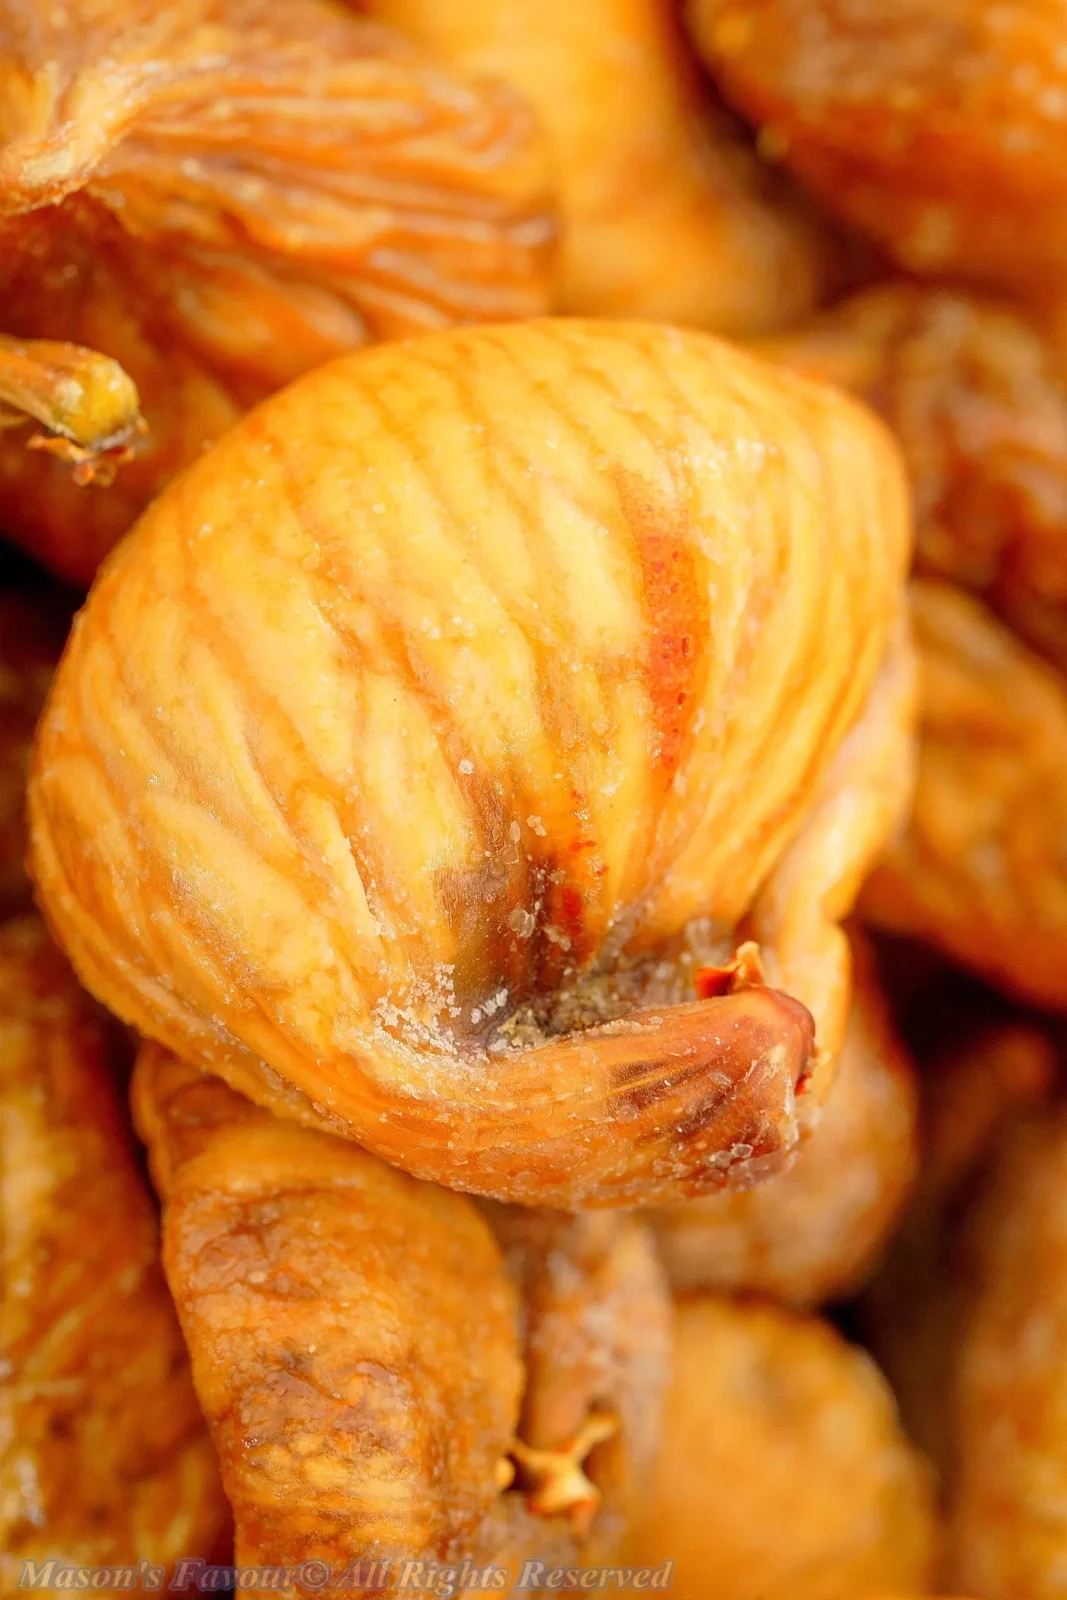 Costco Sunsational Dried Figs，無花果乾 - Dried Figs Enlarged View 2